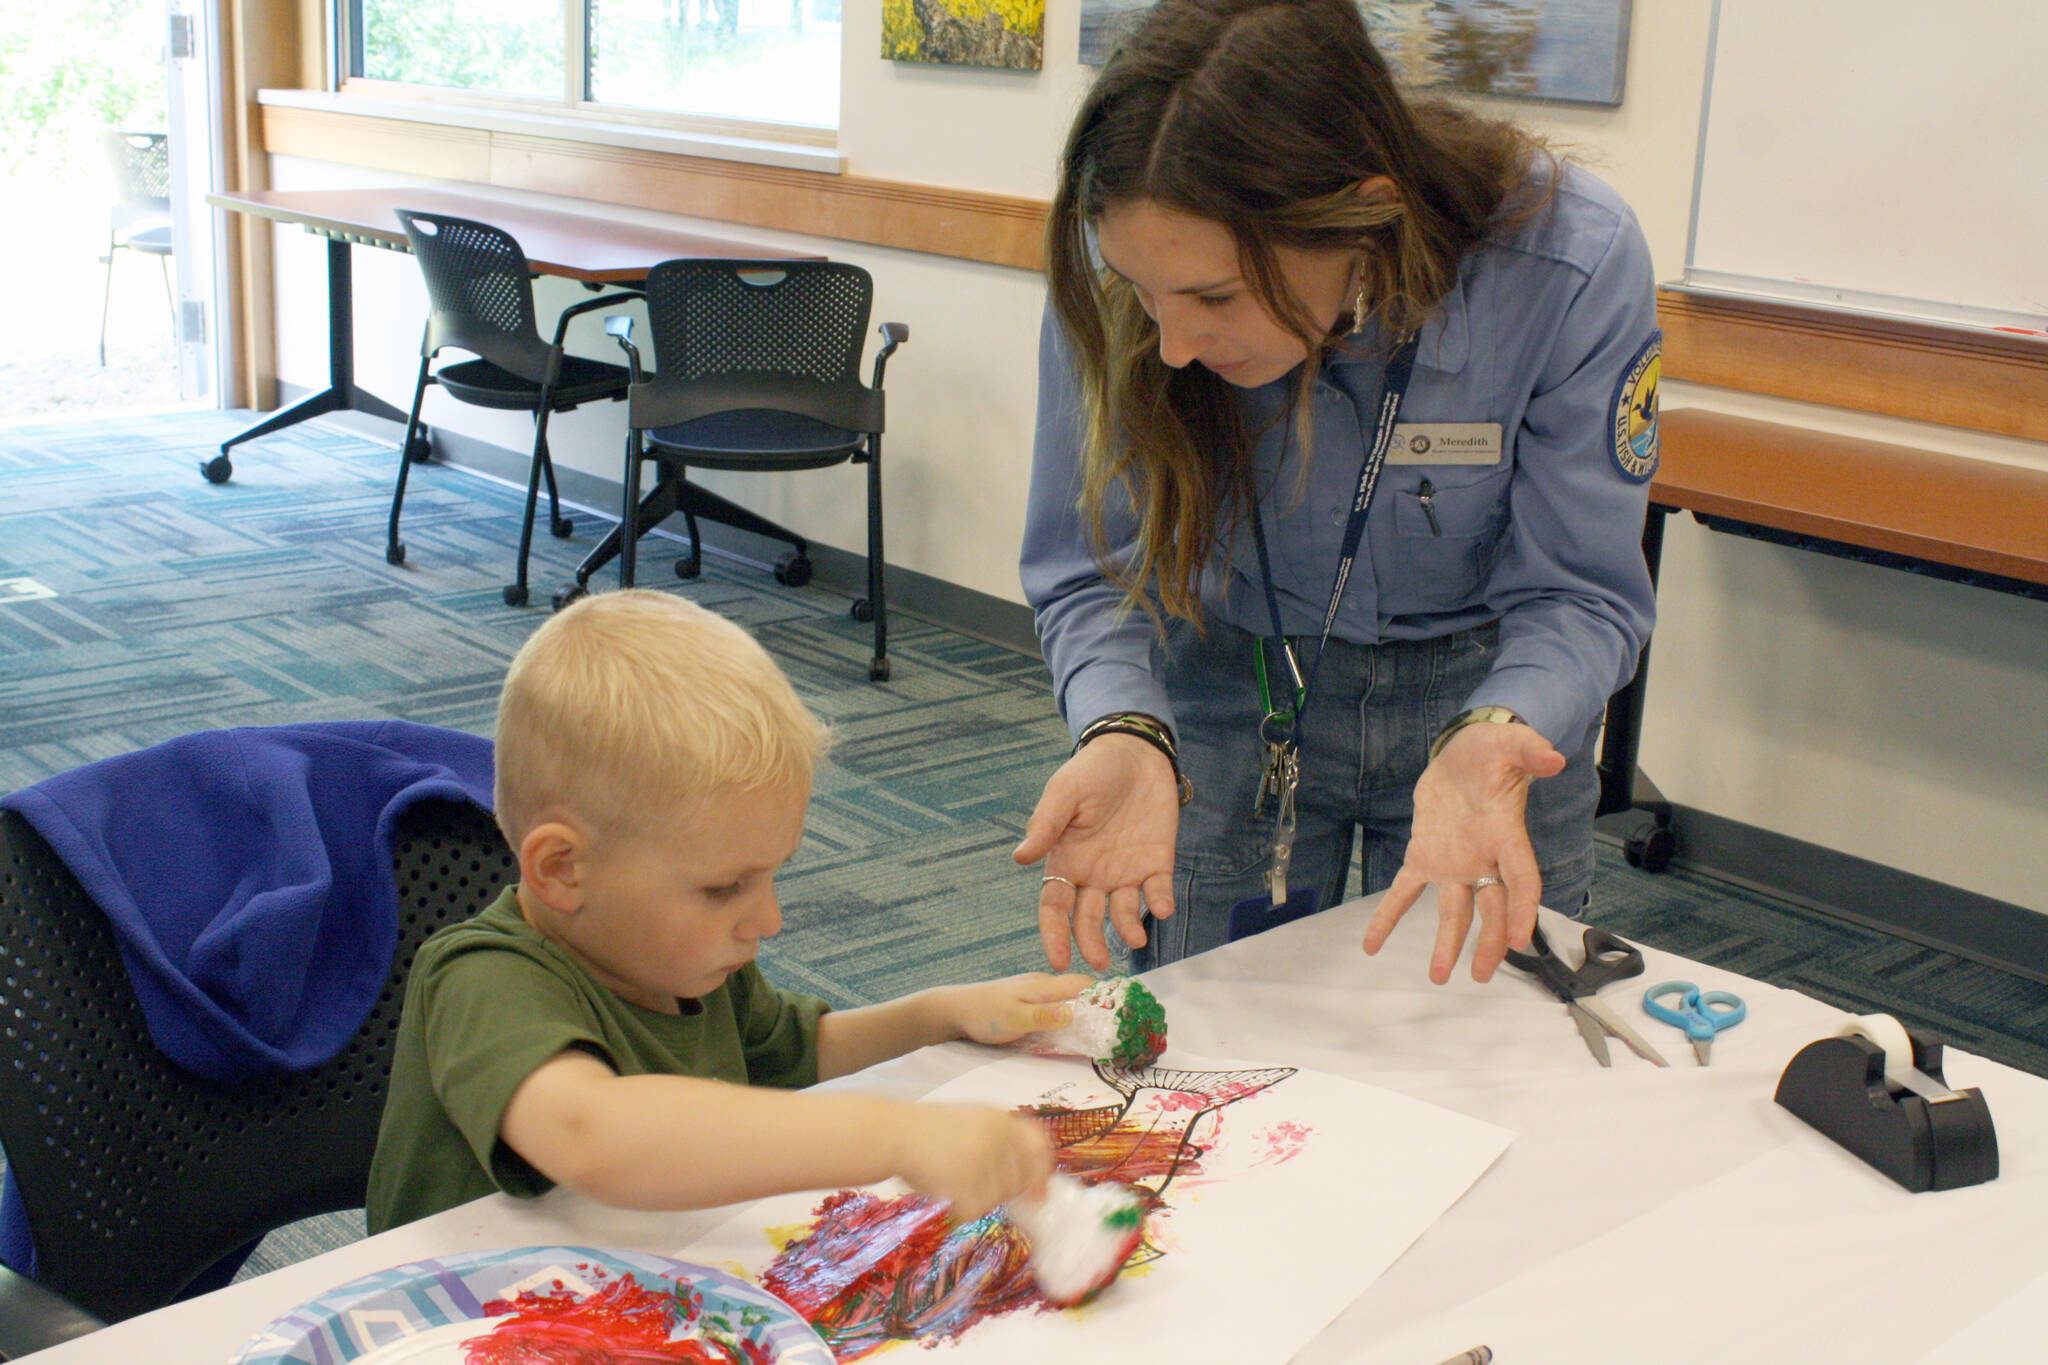 Environmental Education and Visitor Services Intern Meredith Baker helps Blake Voss, 3, paint during Fish Week at the Kenai National Wildlife Refuge in Soldotna, Alaska, on Monday, July 18, 2022. (Camille Botello/Peninsula Clarion file)